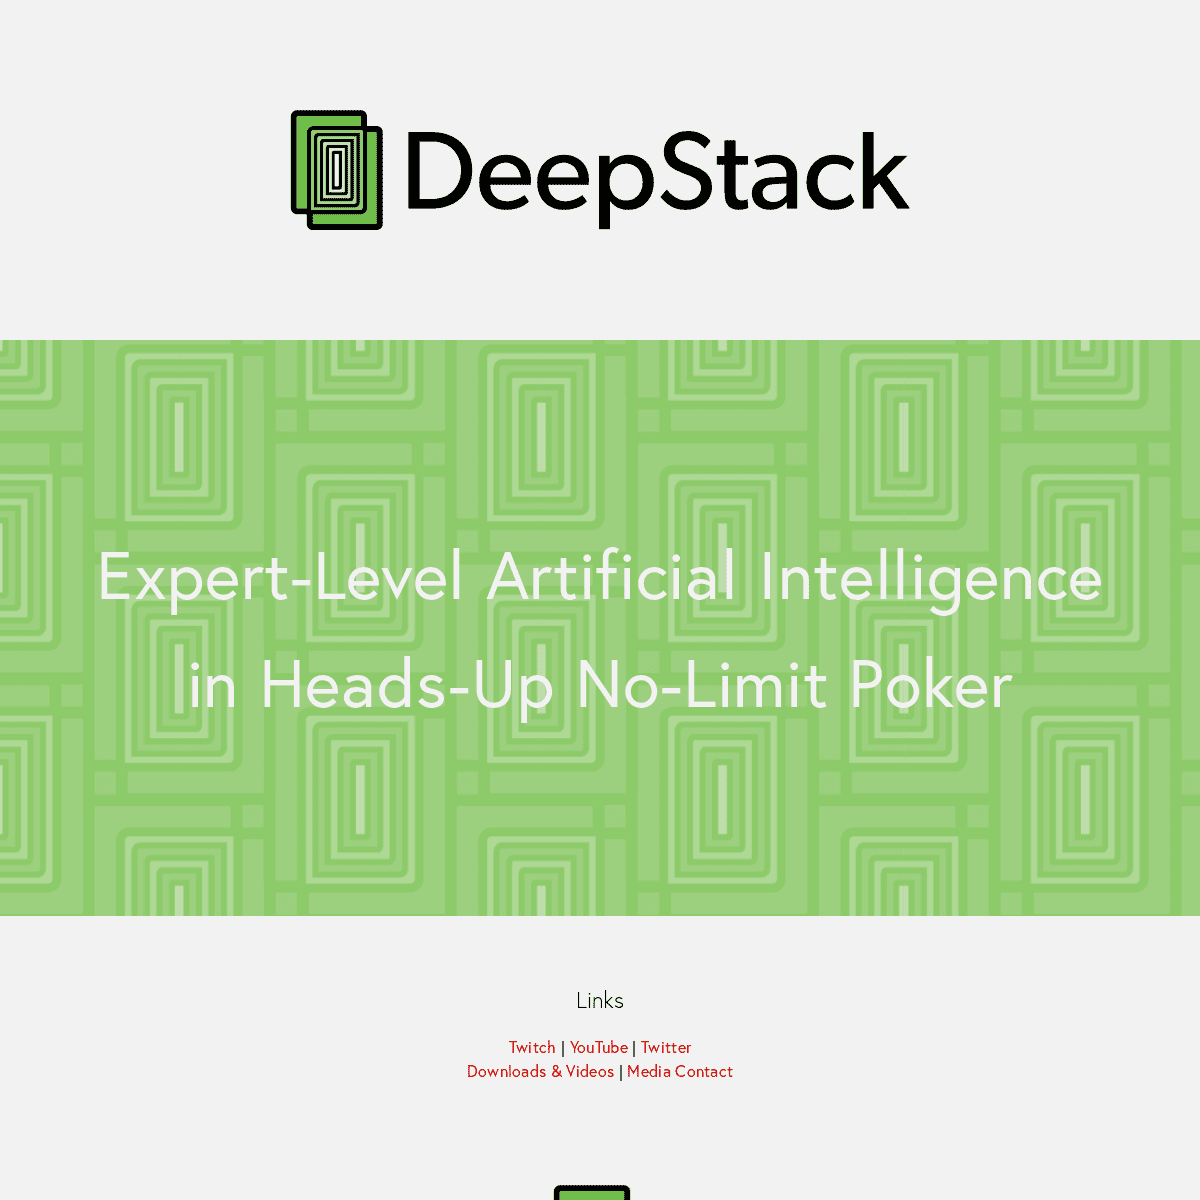 A complete backup of deepstack.ai